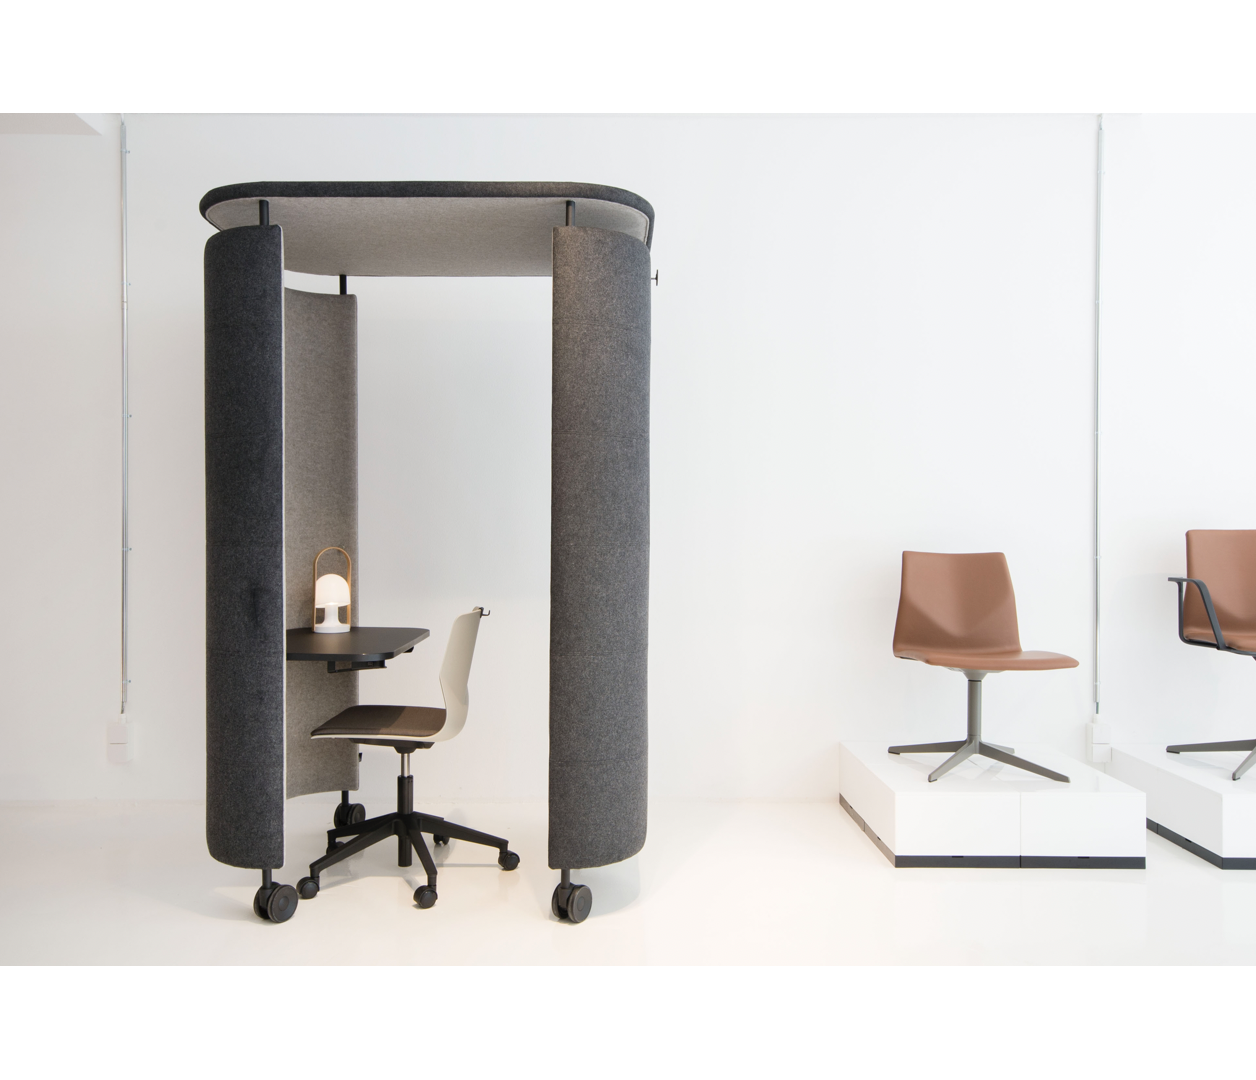 OCEE_FOUR – Work _ Study Booths – InnoPod – Packshot Image 4 Large